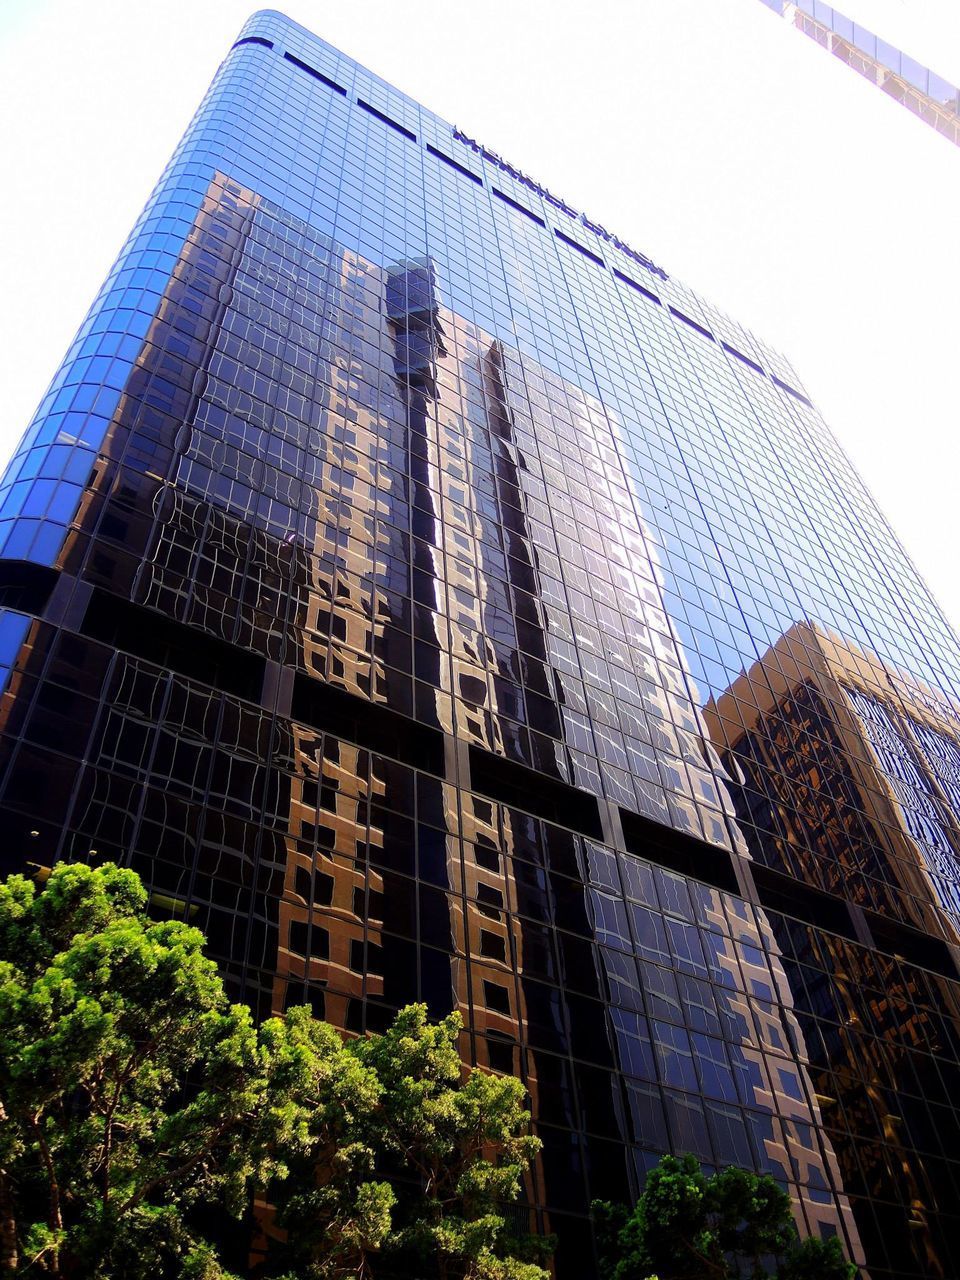 LOW ANGLE VIEW OF MODERN SKYSCRAPER AGAINST CLEAR SKY